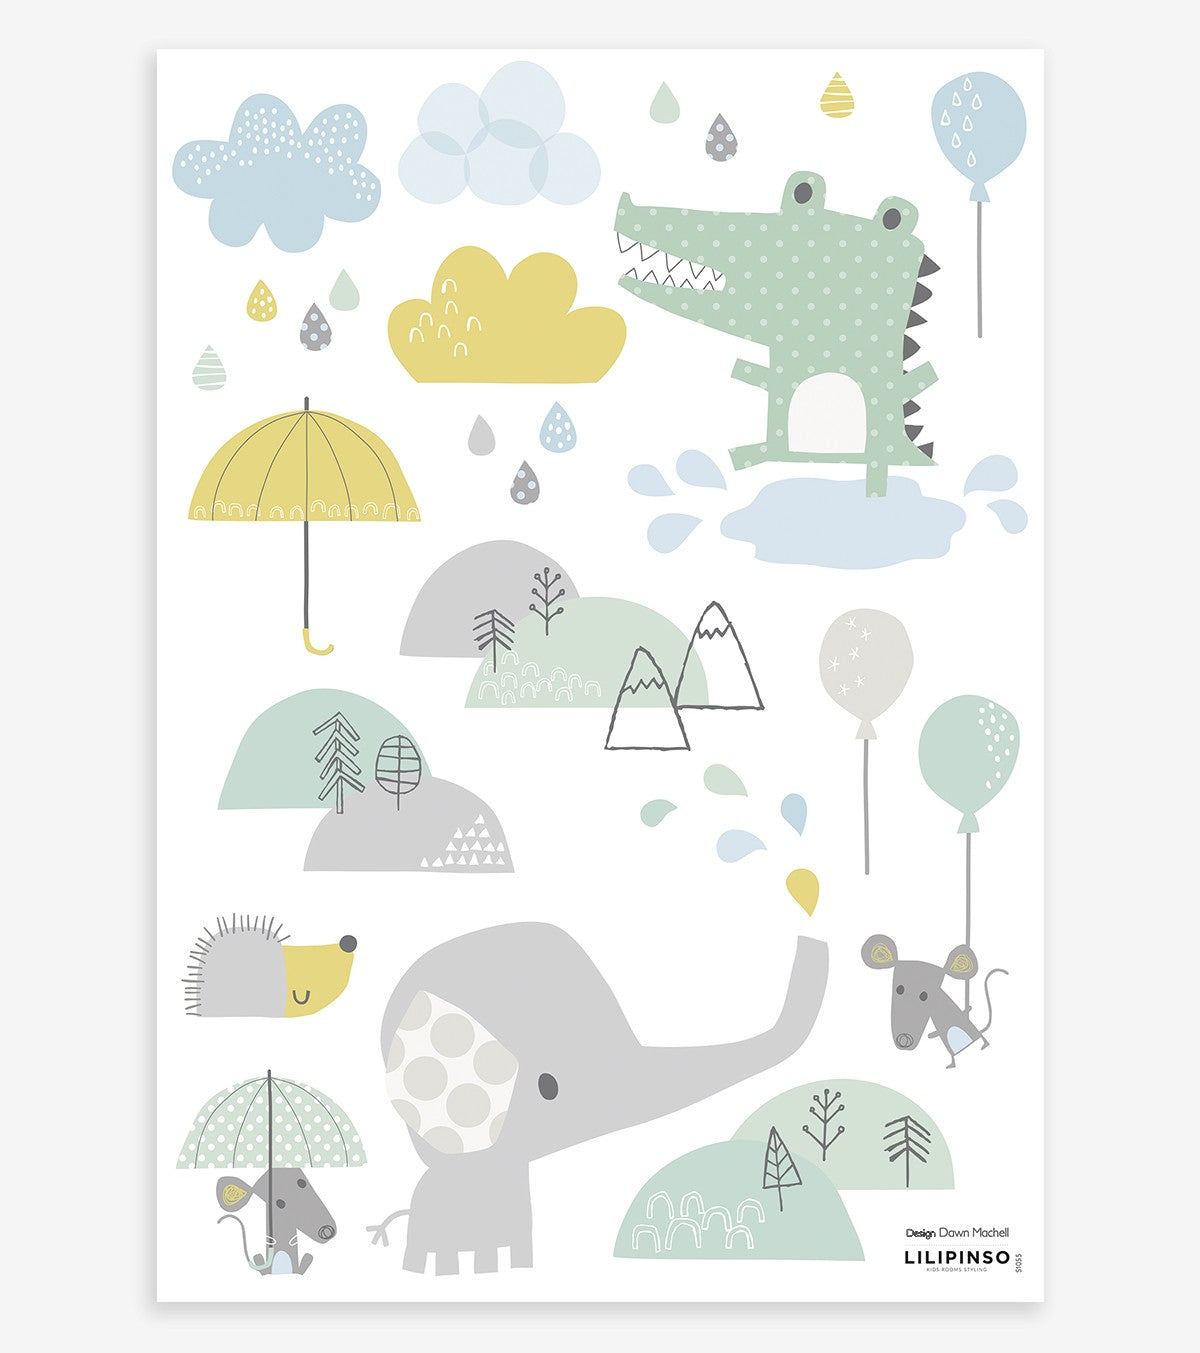 SMILE IT'S RAINING - Wall decals murals - Animals, clouds and drops